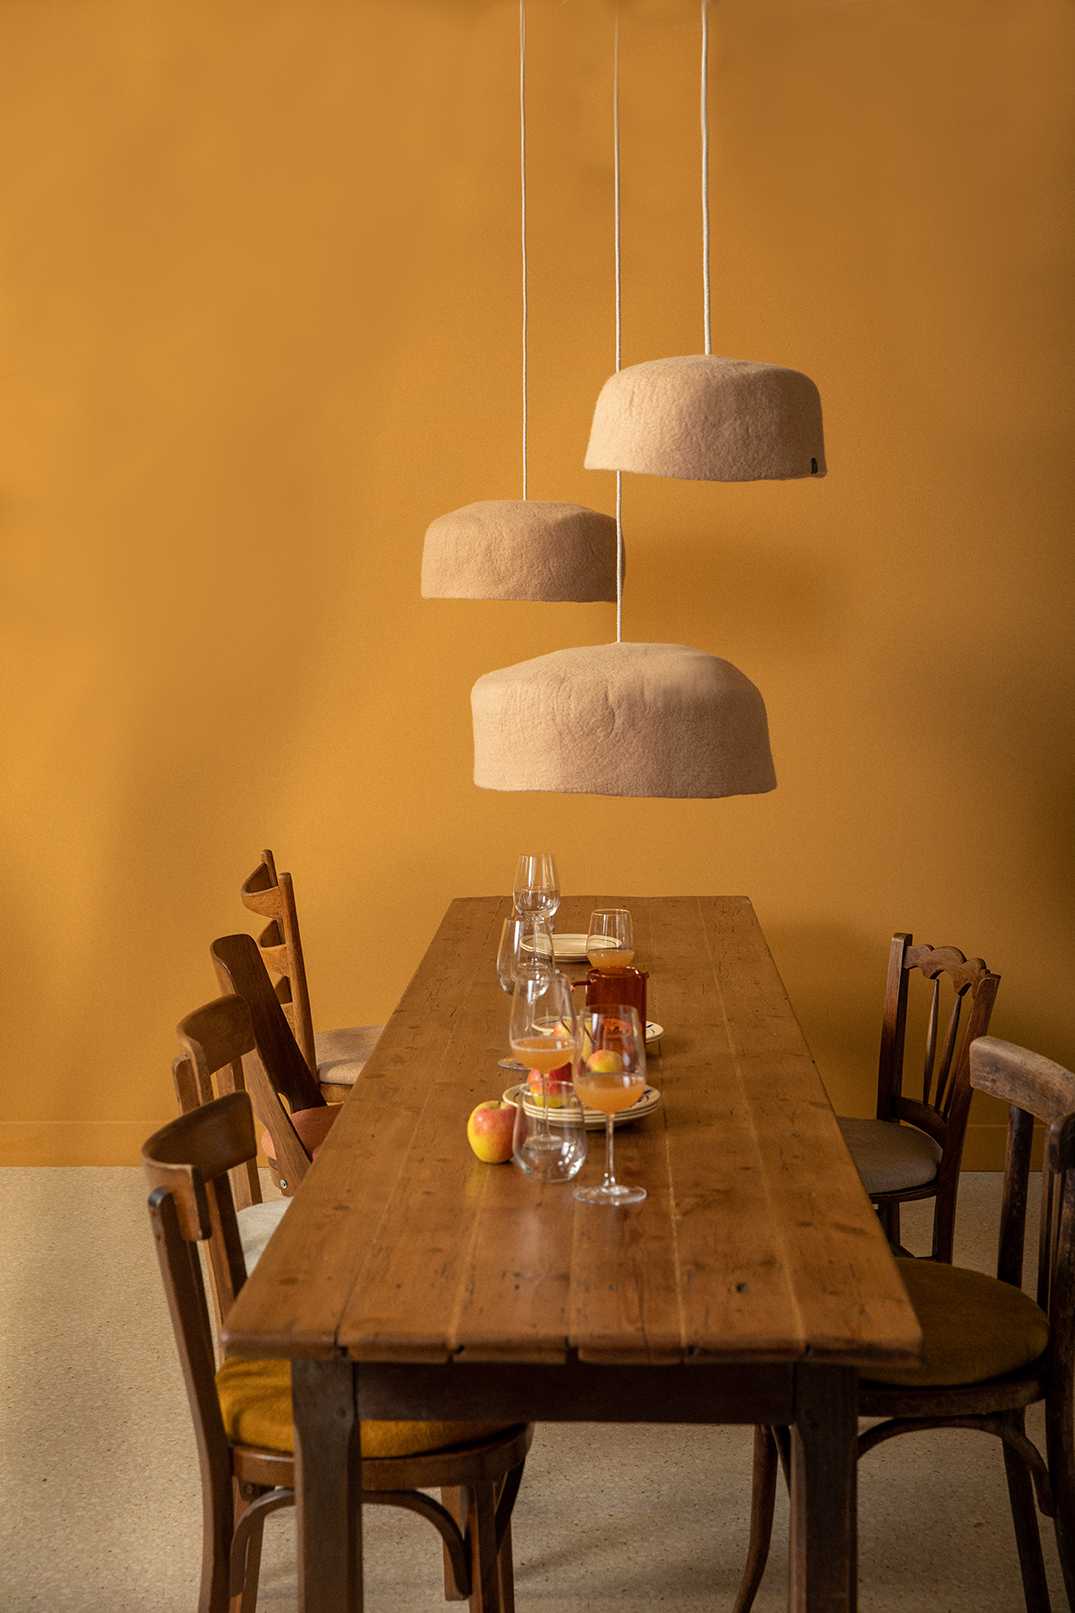 Trio of light pink wool felt lampshades above a dining table